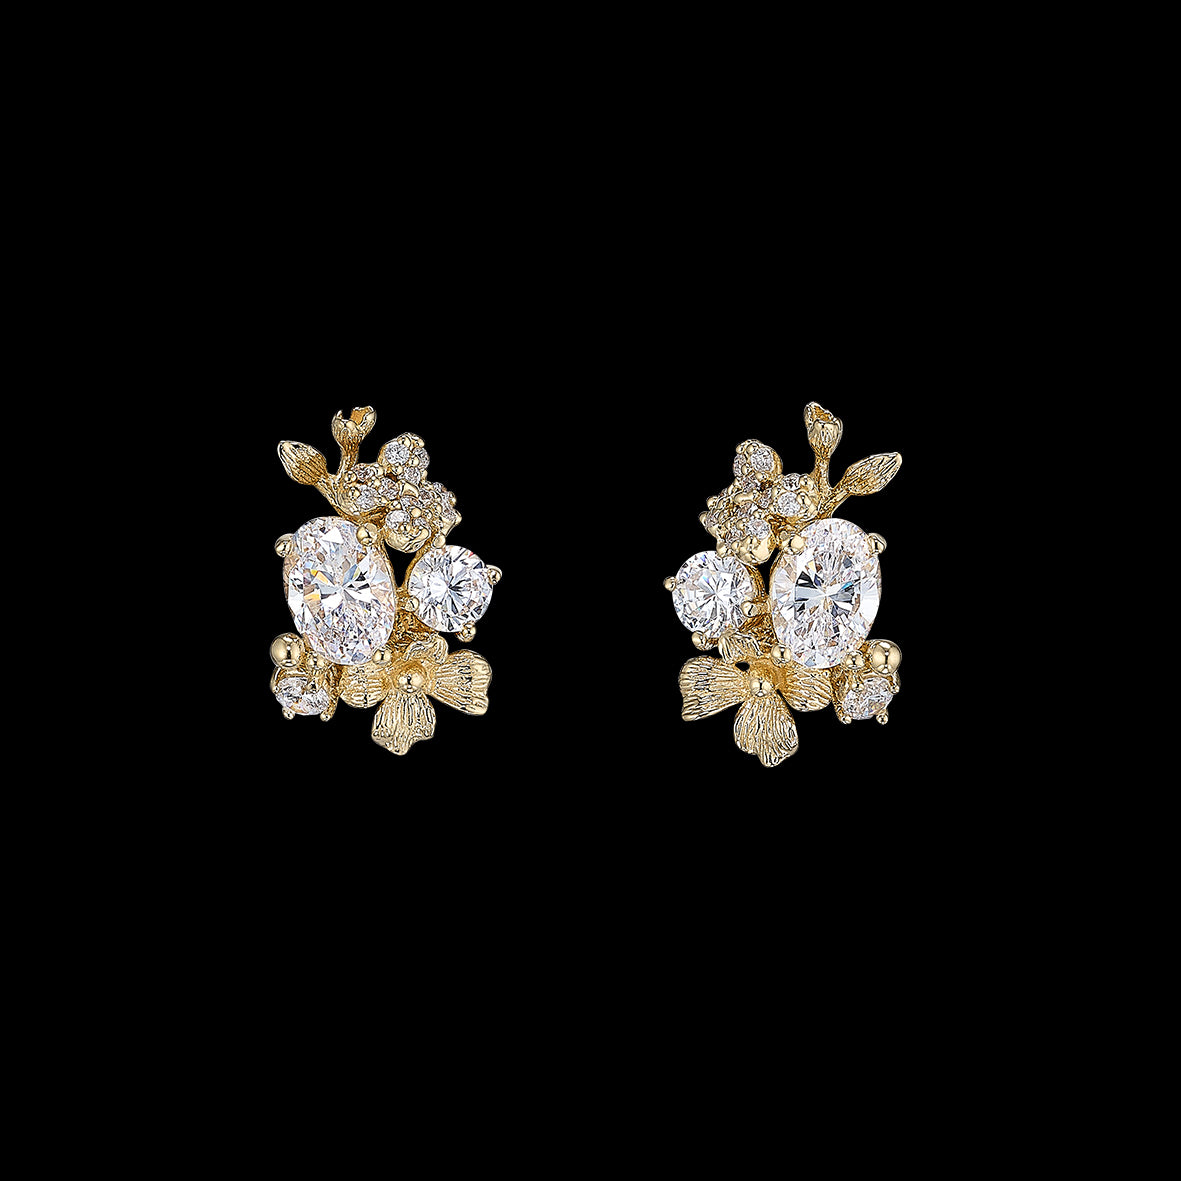 Golden Posy Diamond Studs, Earrings, Anabela Chan Joaillerie - Fine jewelry with laboratory grown and created gemstones hand-crafted in the United Kingdom. Anabela Chan Joaillerie is the first fine jewellery brand in the world to champion laboratory-grown and created gemstones with high jewellery design, artisanal craftsmanship and a focus on ethical and sustainable innovations.